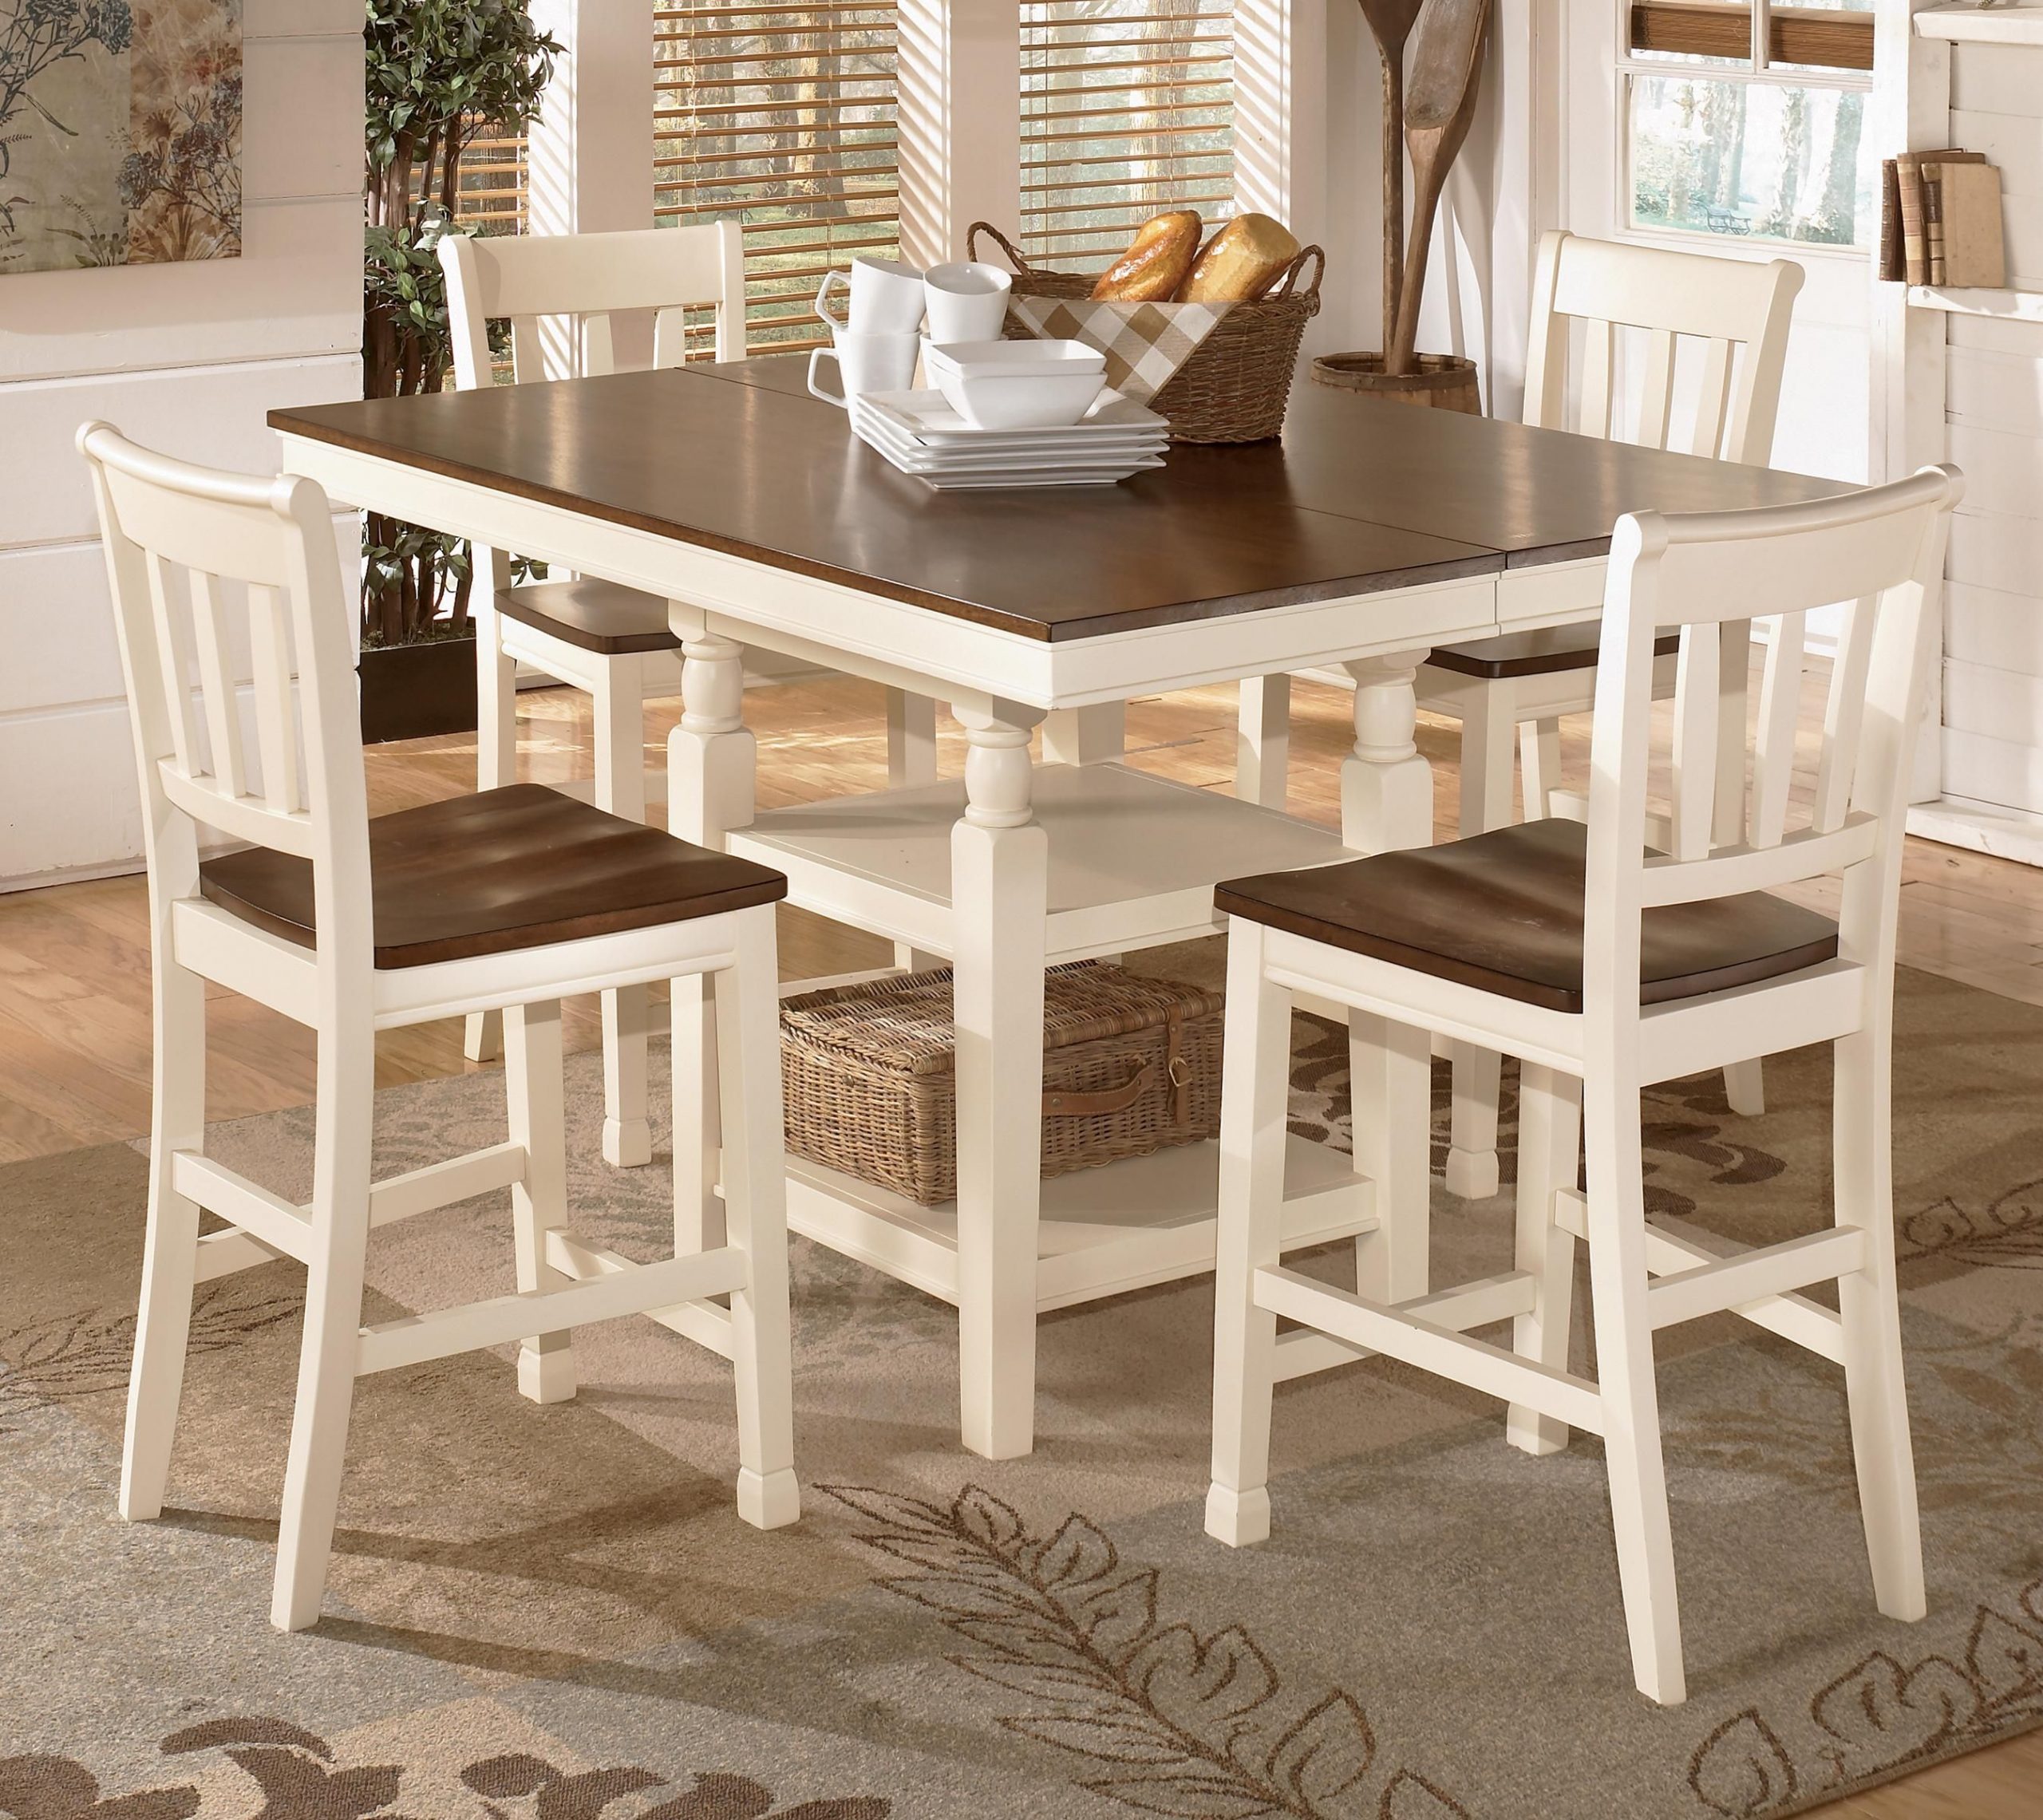 Whitesburg Counter Height Dining Room Table • Faucet Ideas Site